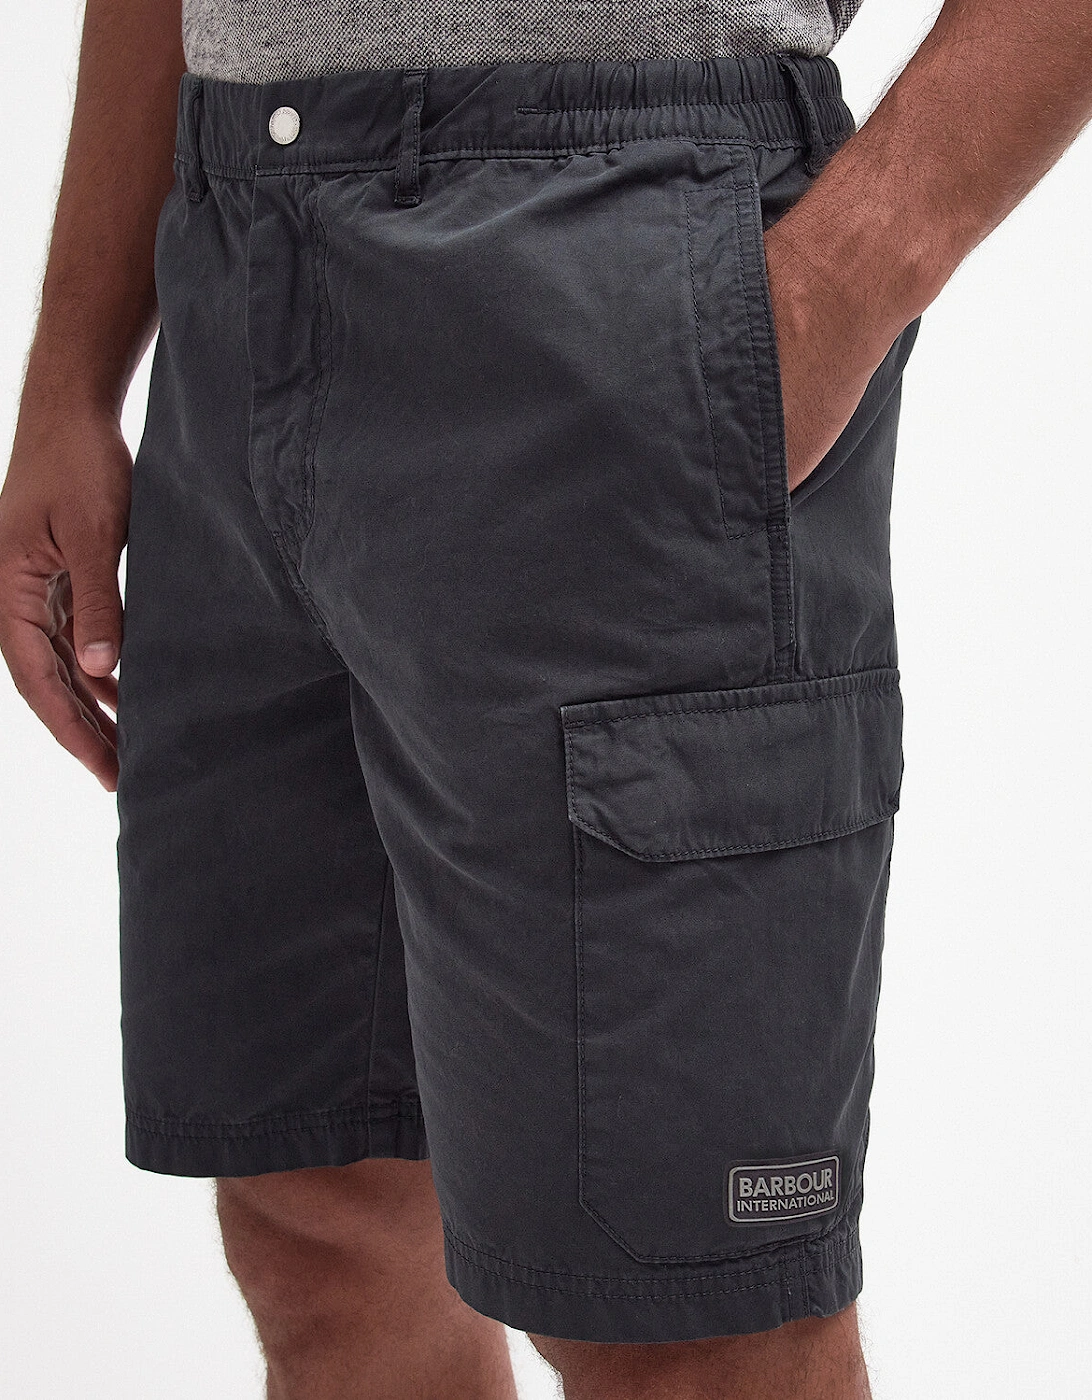 Gear Shorts GN83 Forest River